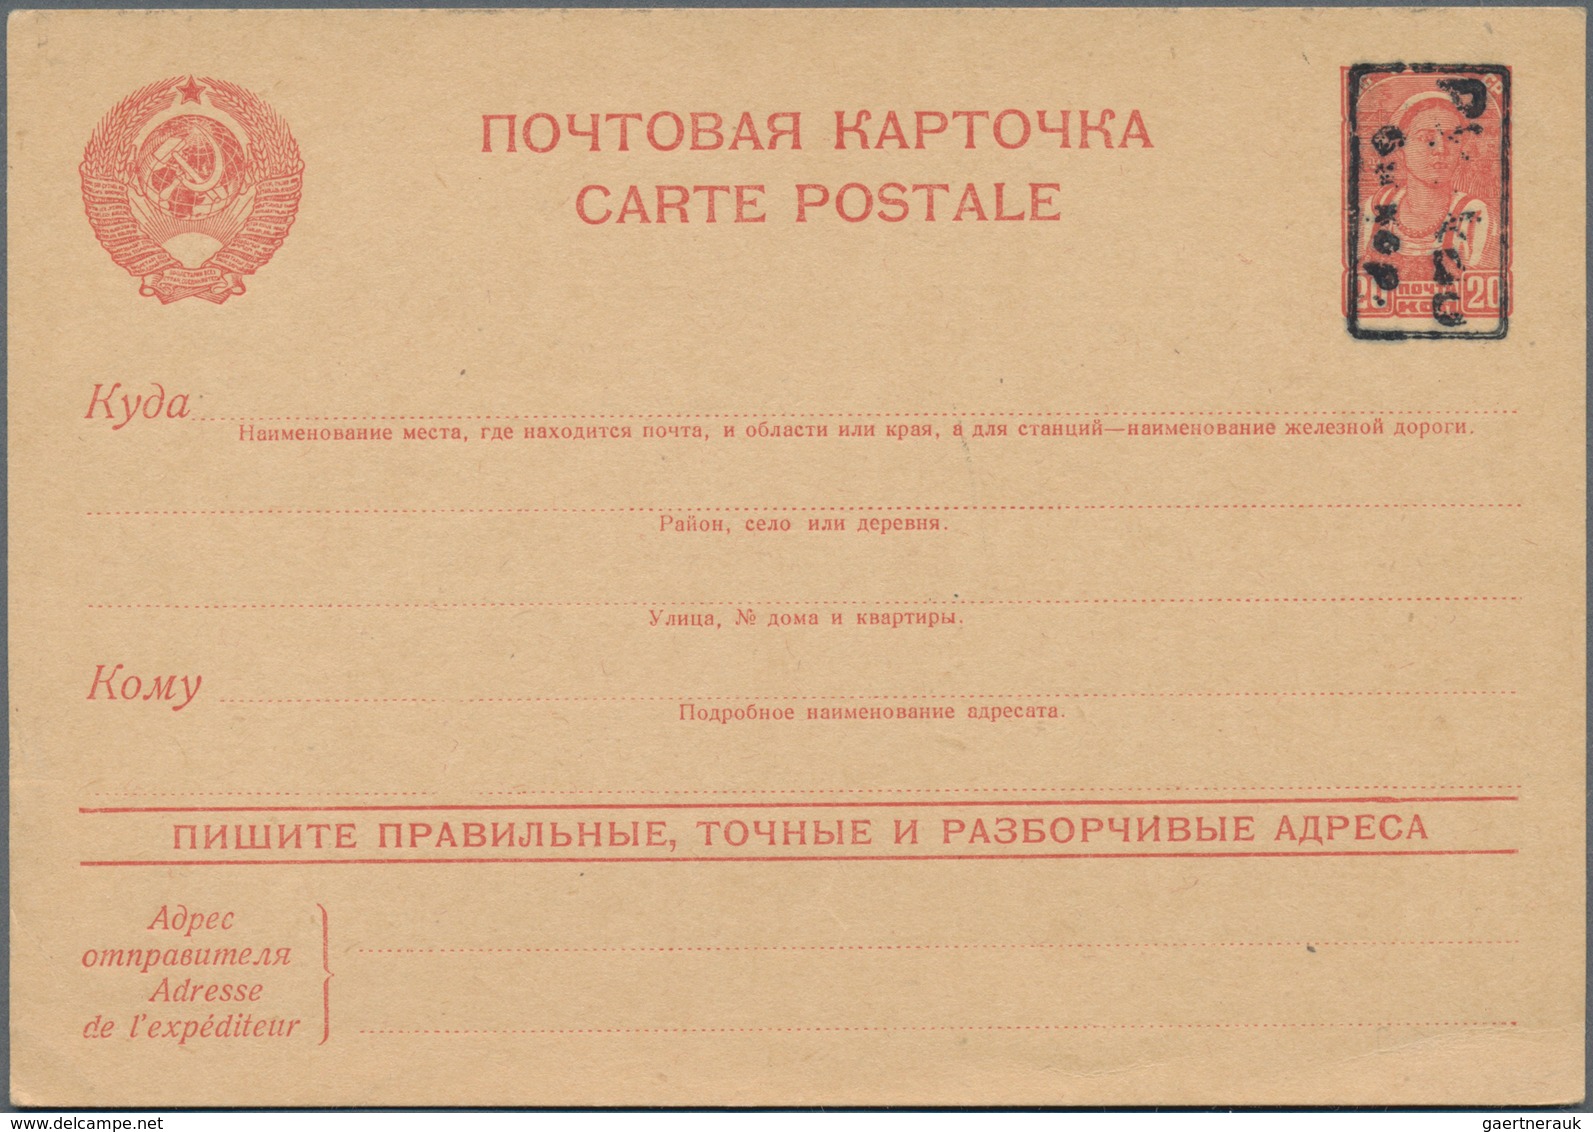 Sowjetunion: 1924/91 ca. 430 covers, cards, letters, postal stationary, while overprints, revaluatio